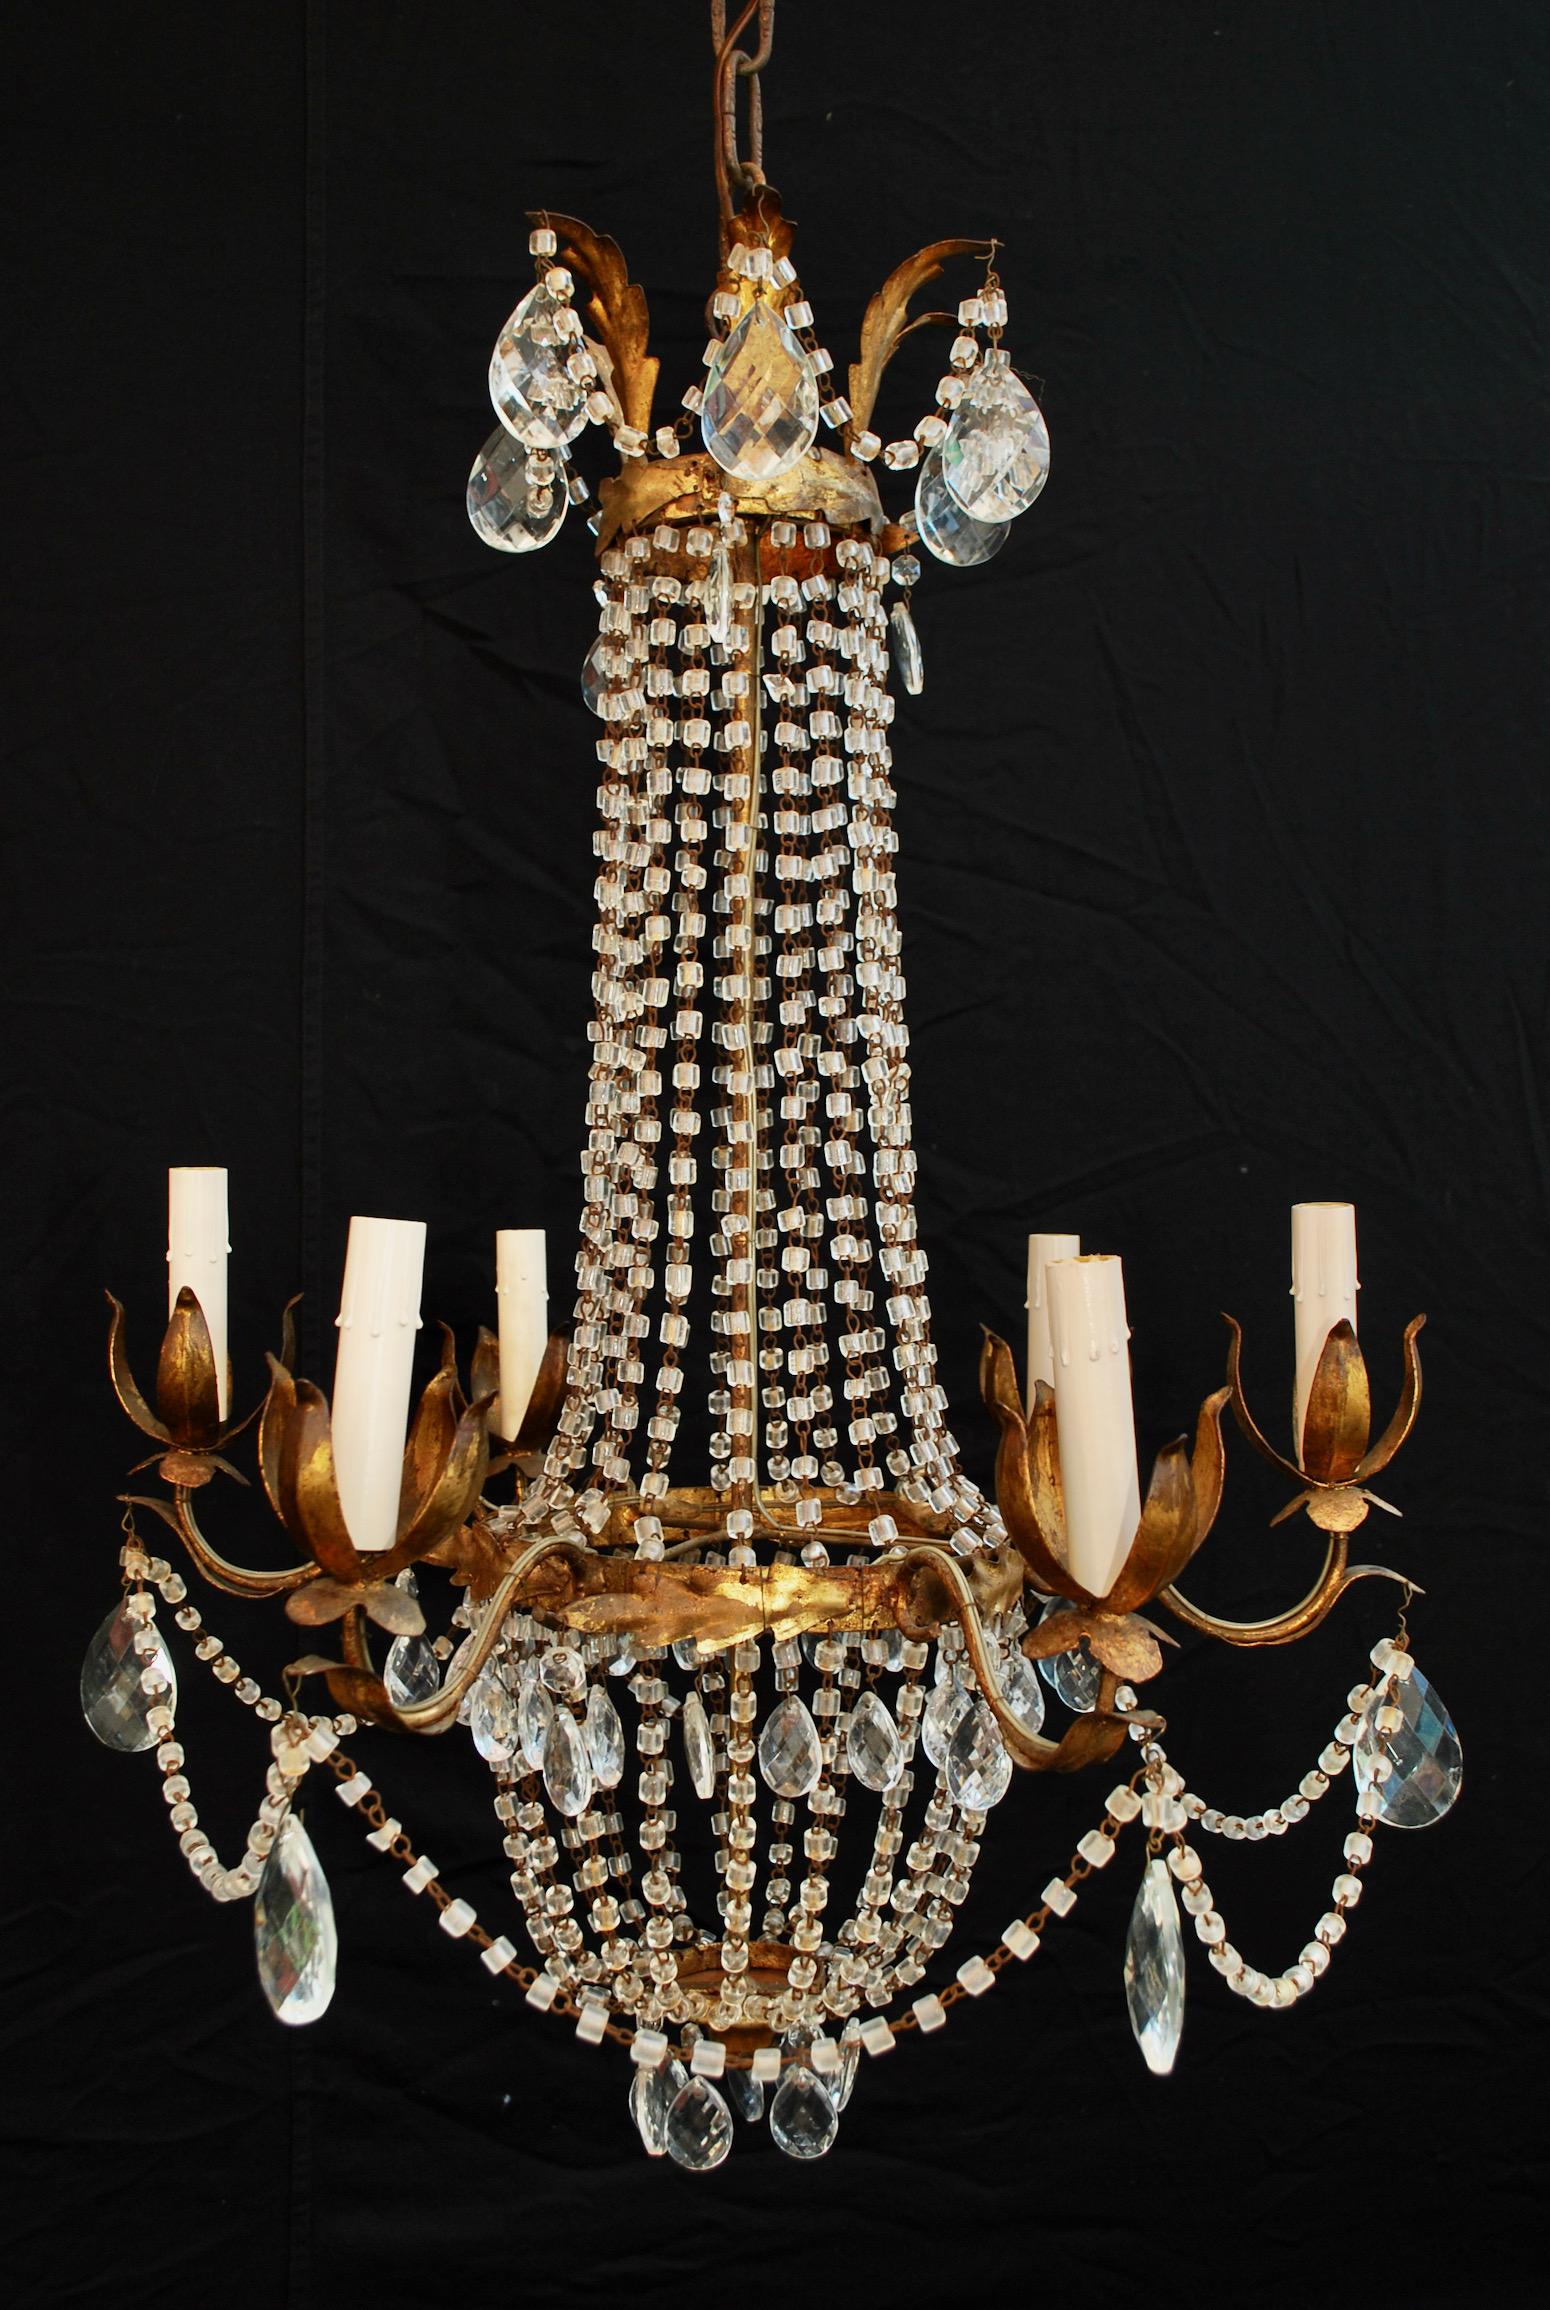 A beautiful 1930's Italian beaded chandelier, the patina is so much nicer in person.